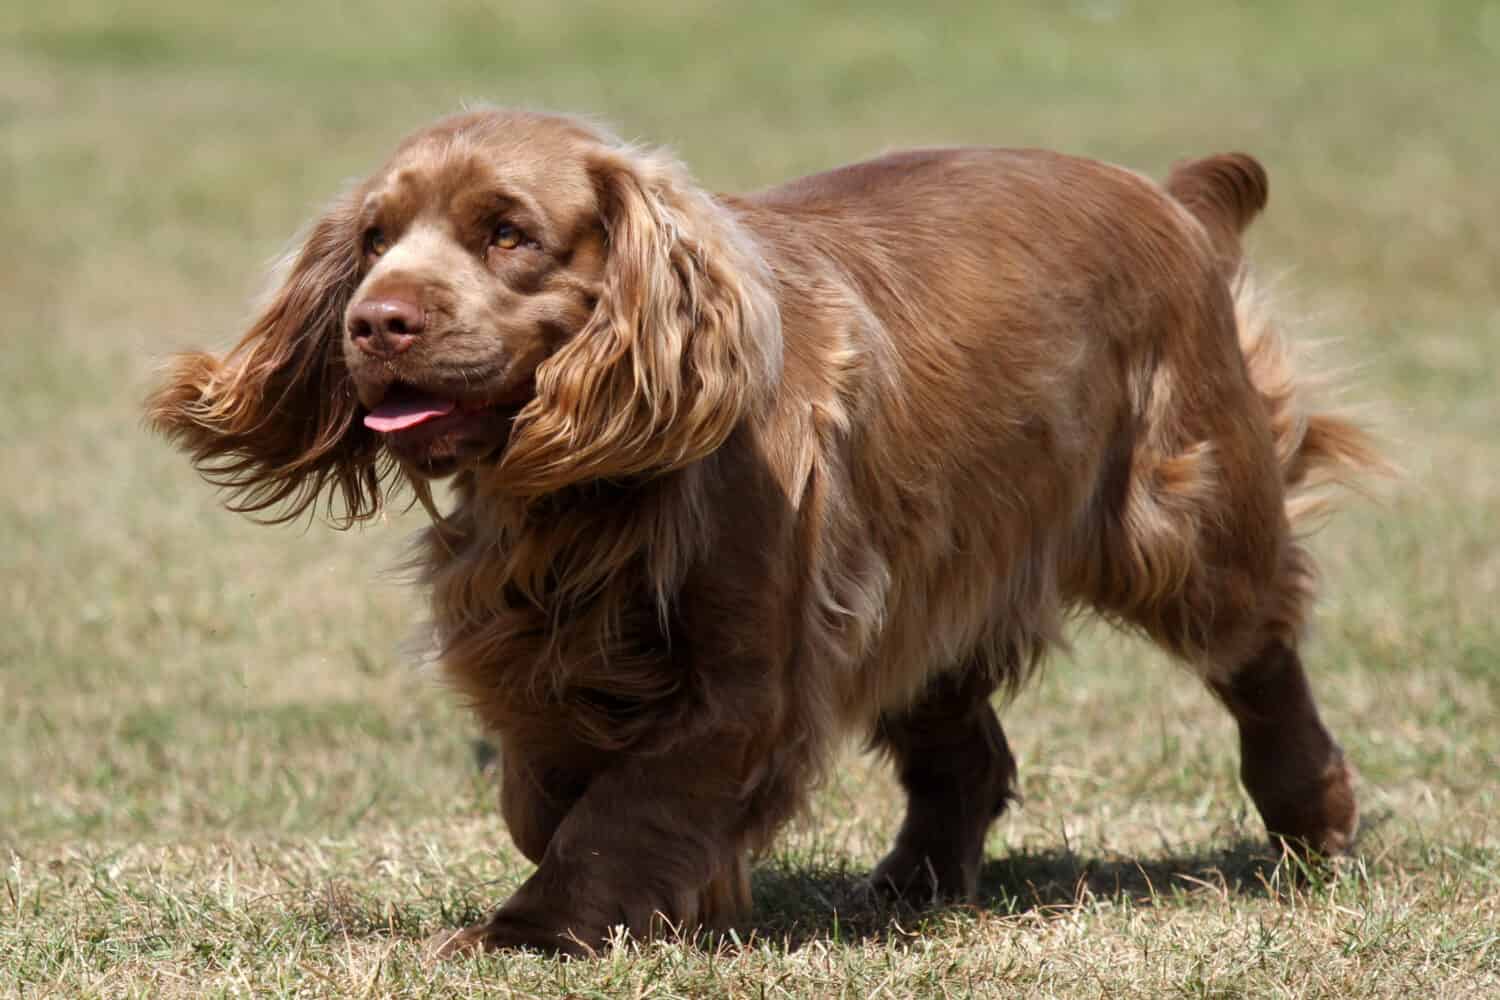 A Sussex Spaniel on grass